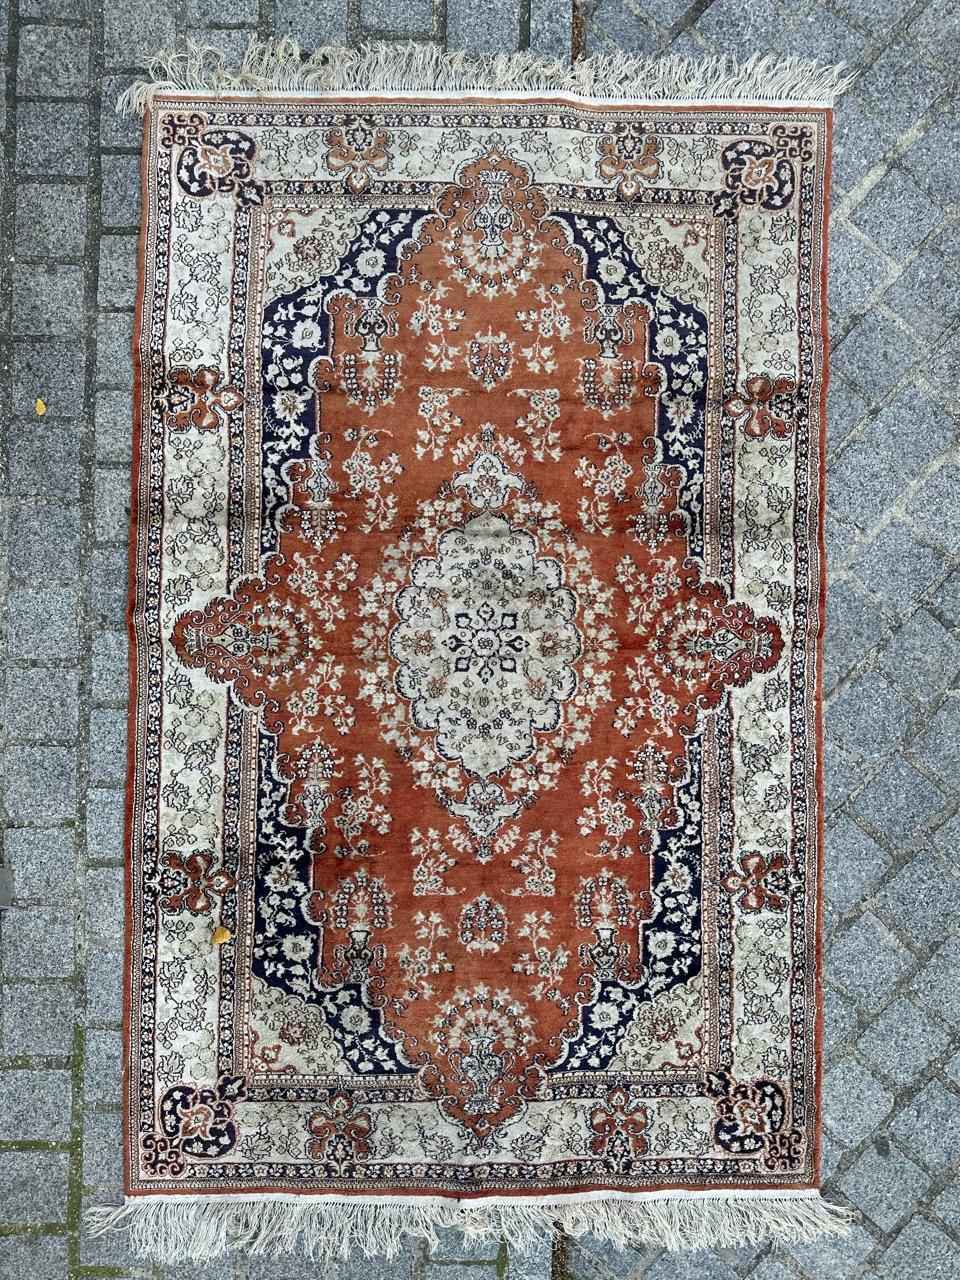 Beautiful vintage silk rug in the style of Persian Qom rugs, meticulously hand-knotted in China. This exquisite piece features intricate handwoven floral designs in lovely colors. The orange field is adorned with a white medallion featuring stylized